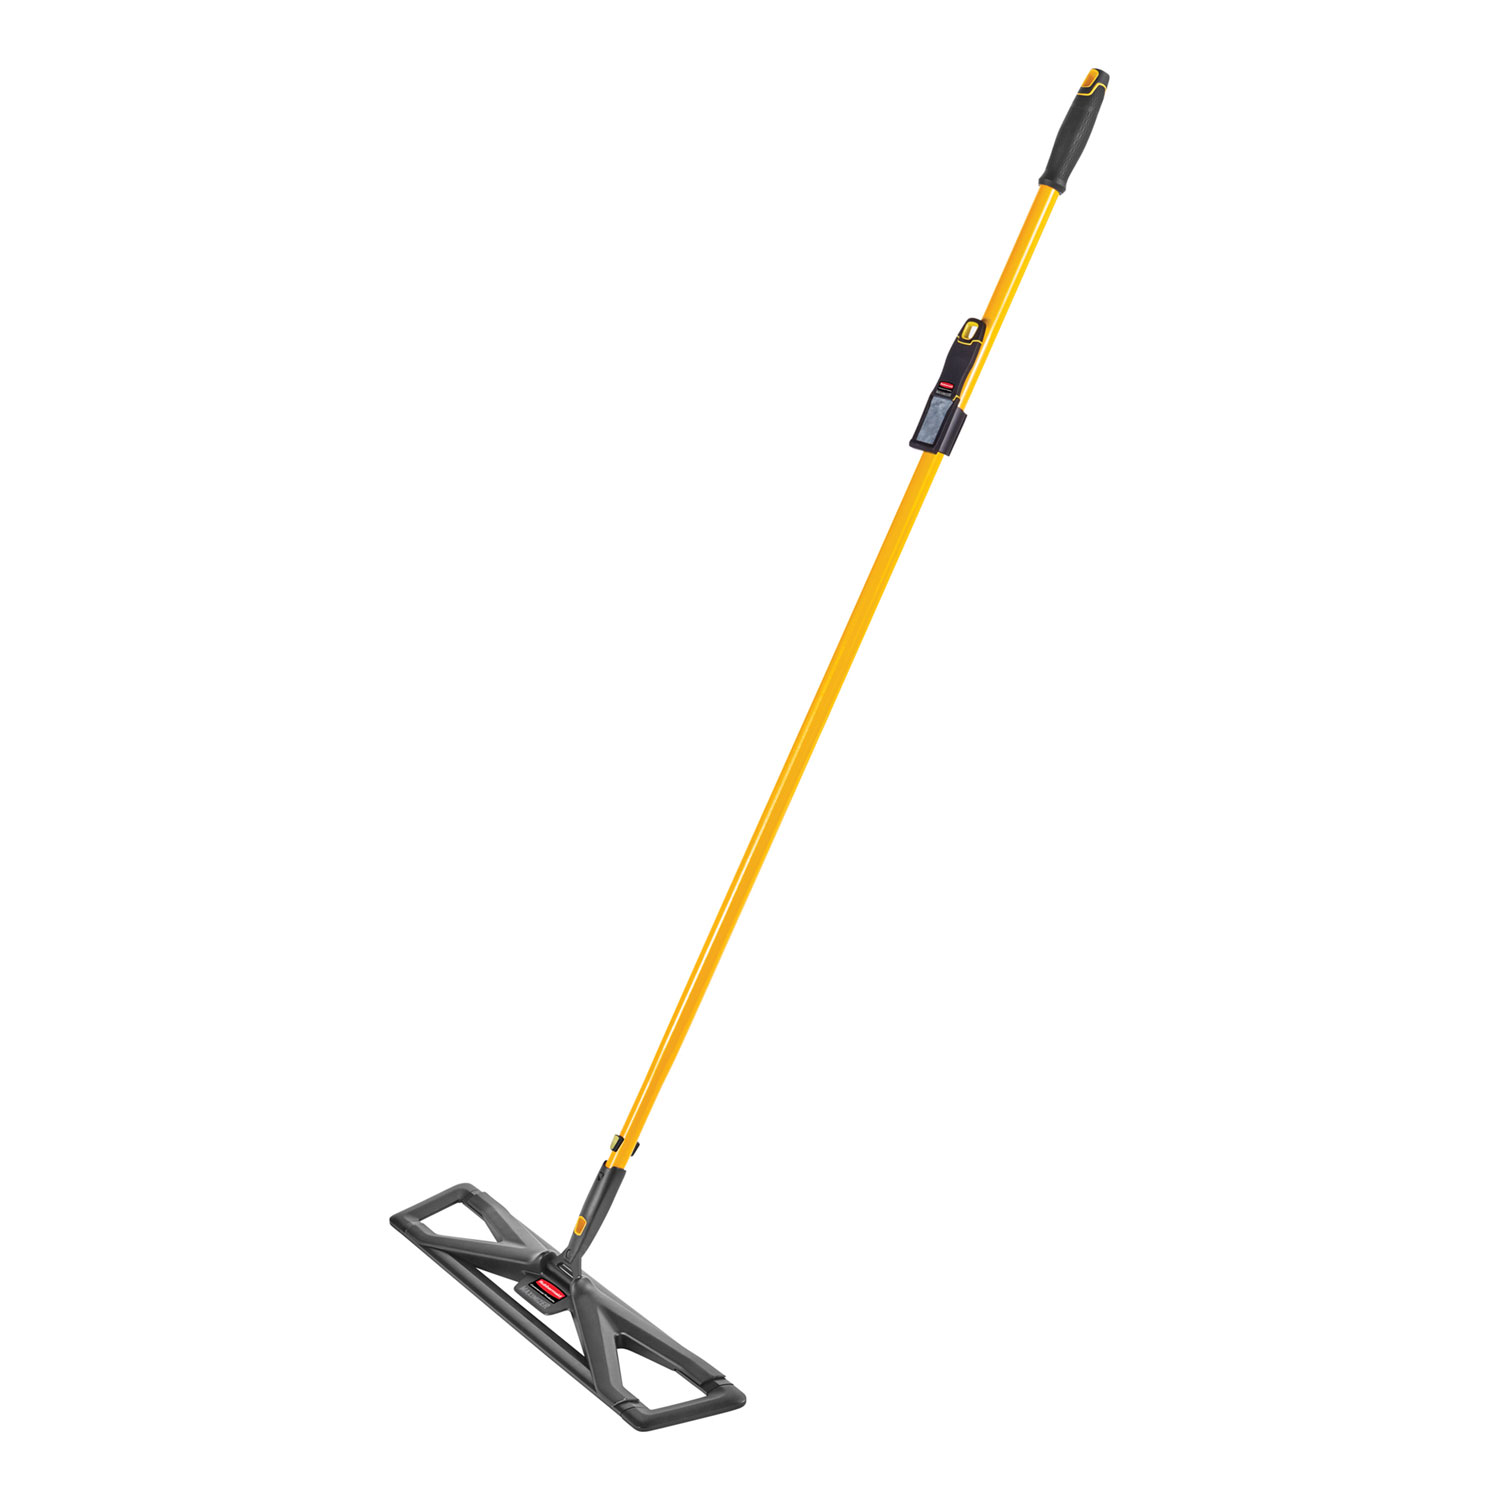  Rubbermaid Commercial 2018809 Maximizer Dust Mop Frame with Handle and Scraper, 36 x 5.5, Yellow/Black (RCP2018809) 